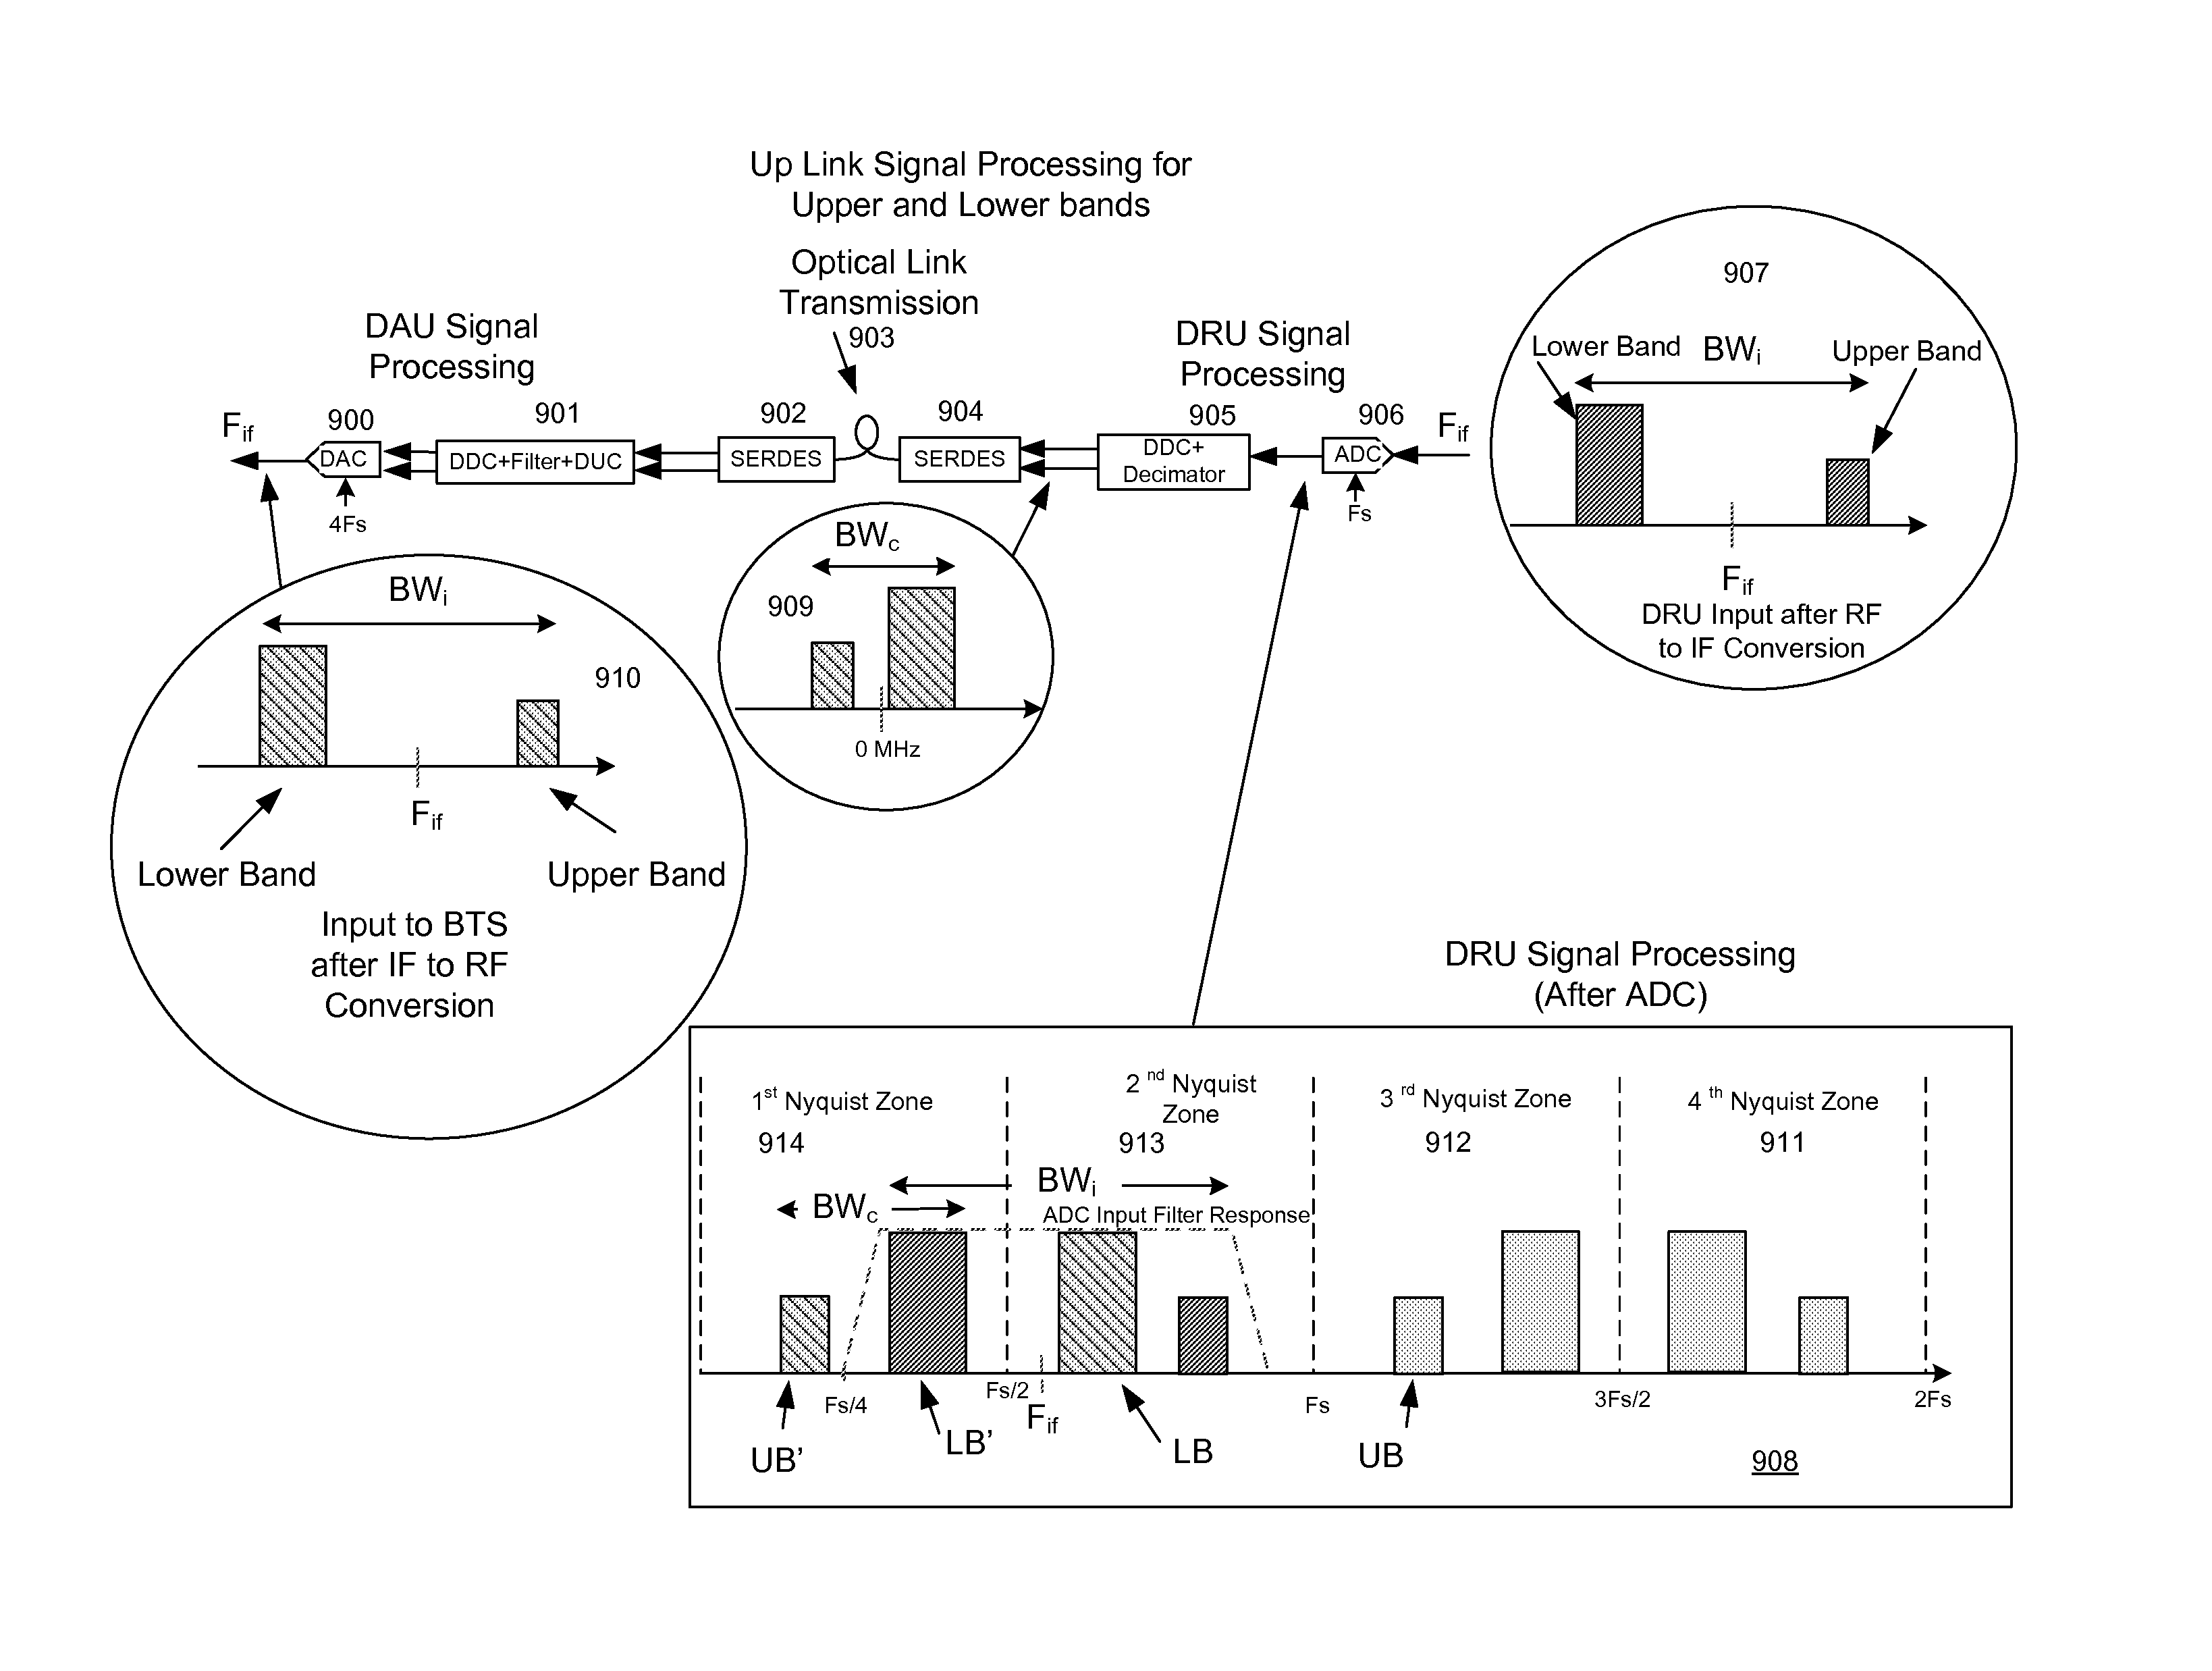 Software configurable distributed antenna system and method for bandwidth compression and transport of signals in noncontiguous frequency blocks